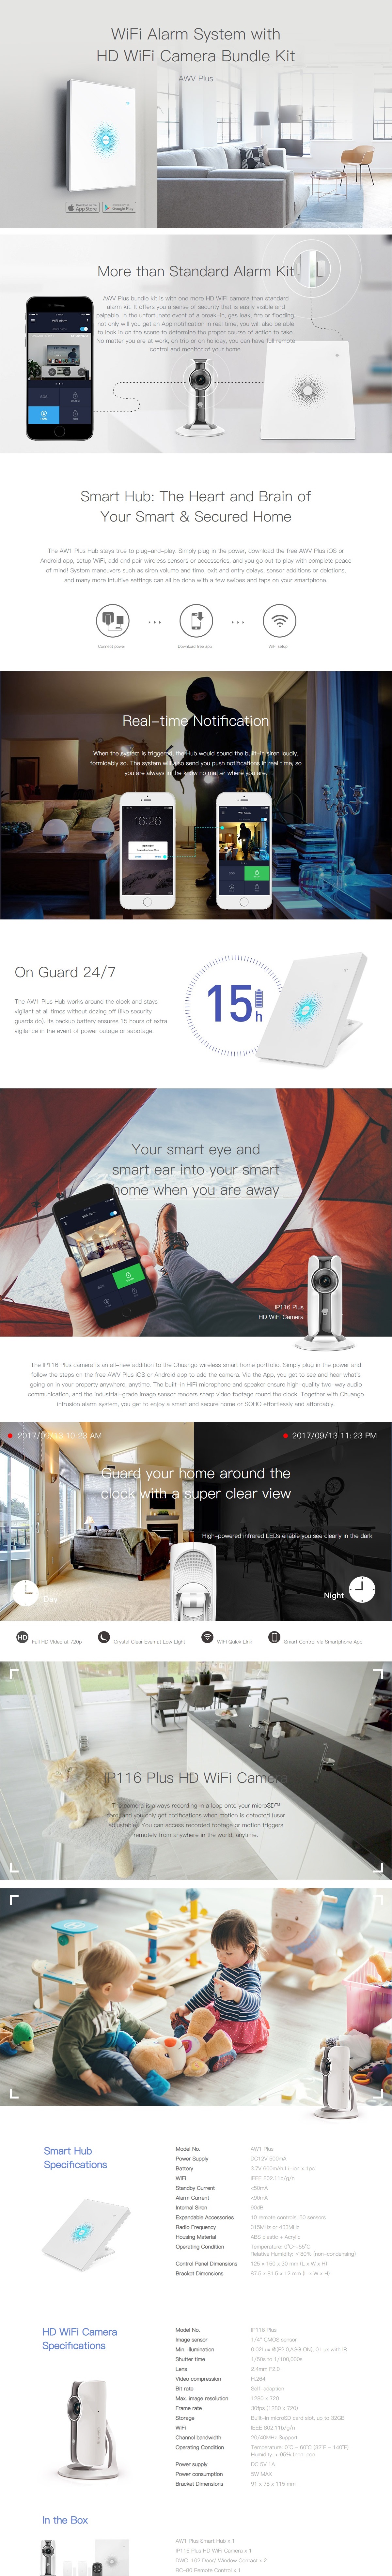 A large marketing image providing additional information about the product Chuango AWV Plus WiFi Alarm System with HD WiFi Camera Bundle Kit - Additional alt info not provided